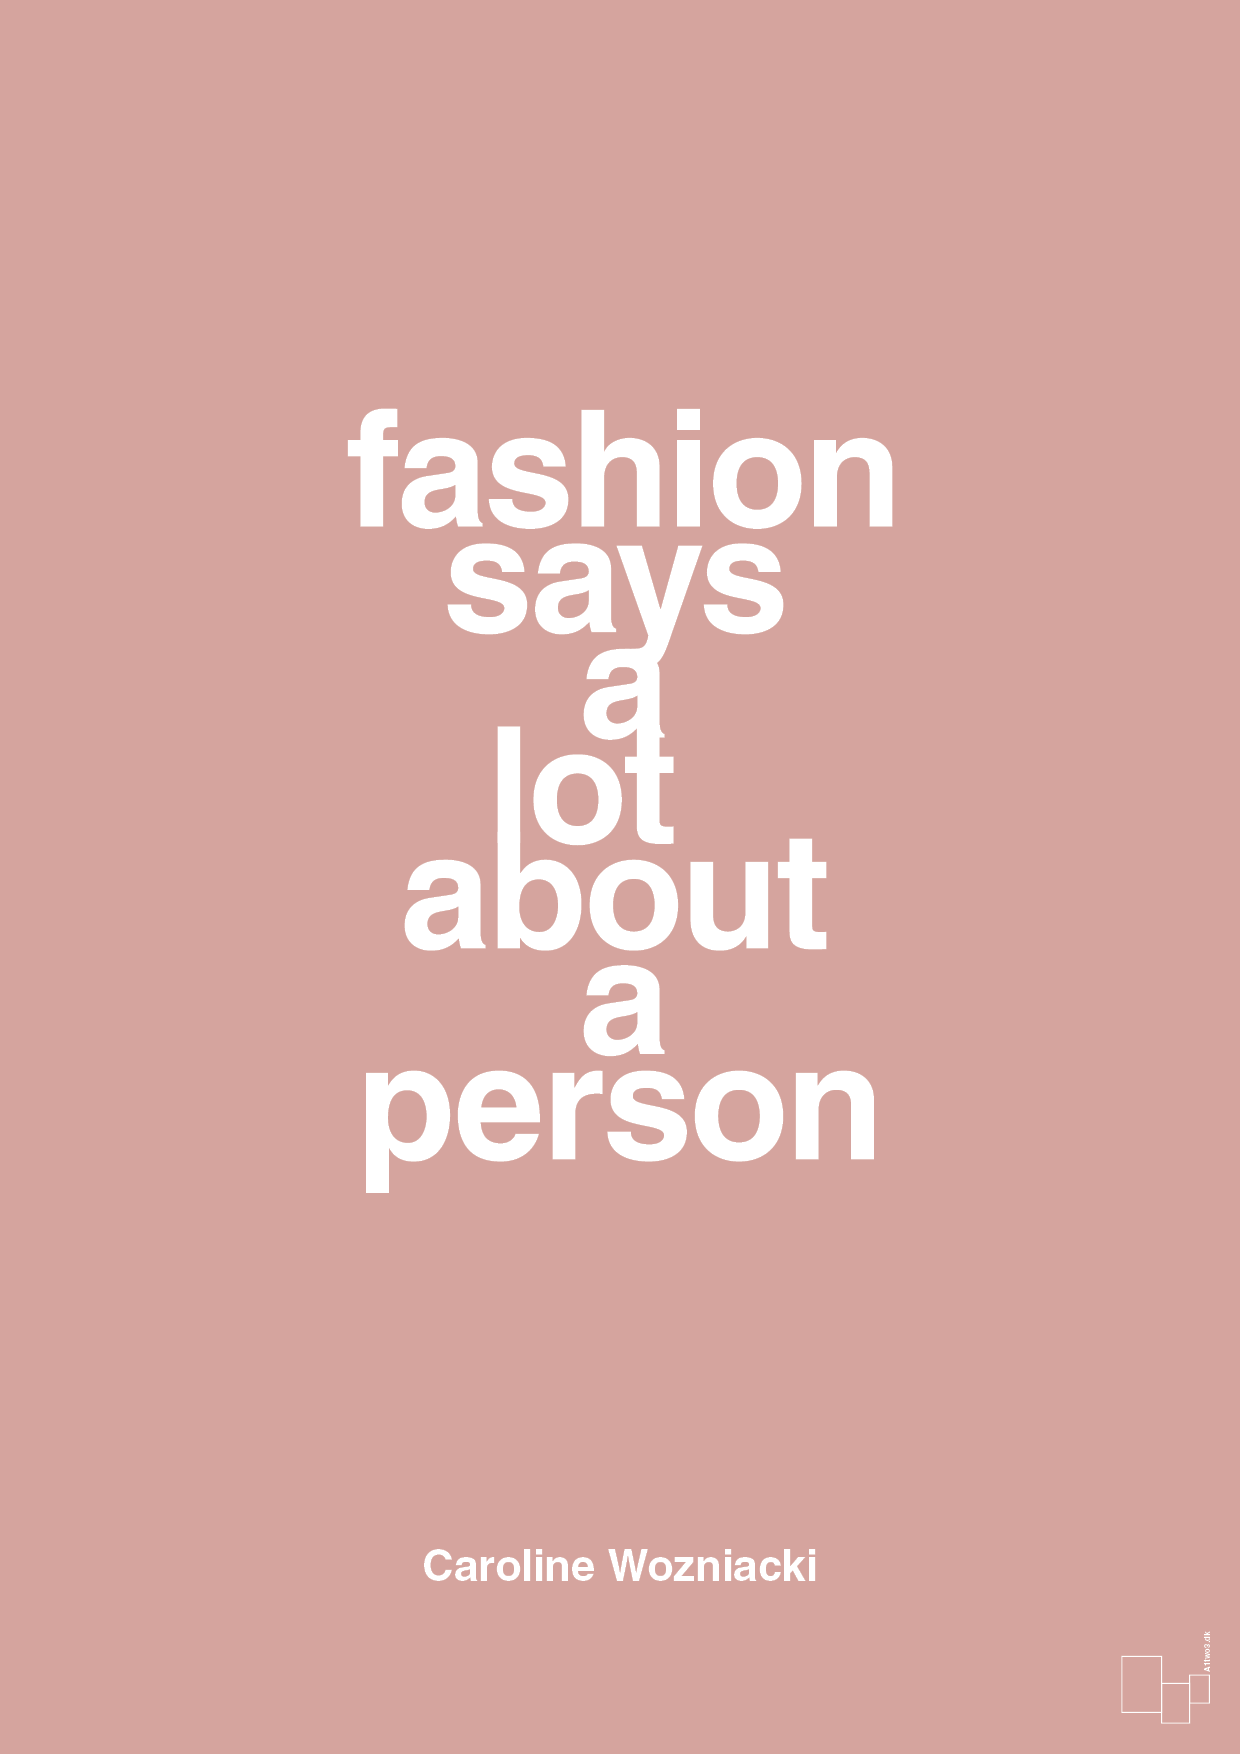 fashion says a lot about a person - Plakat med Citater i Bubble Shell